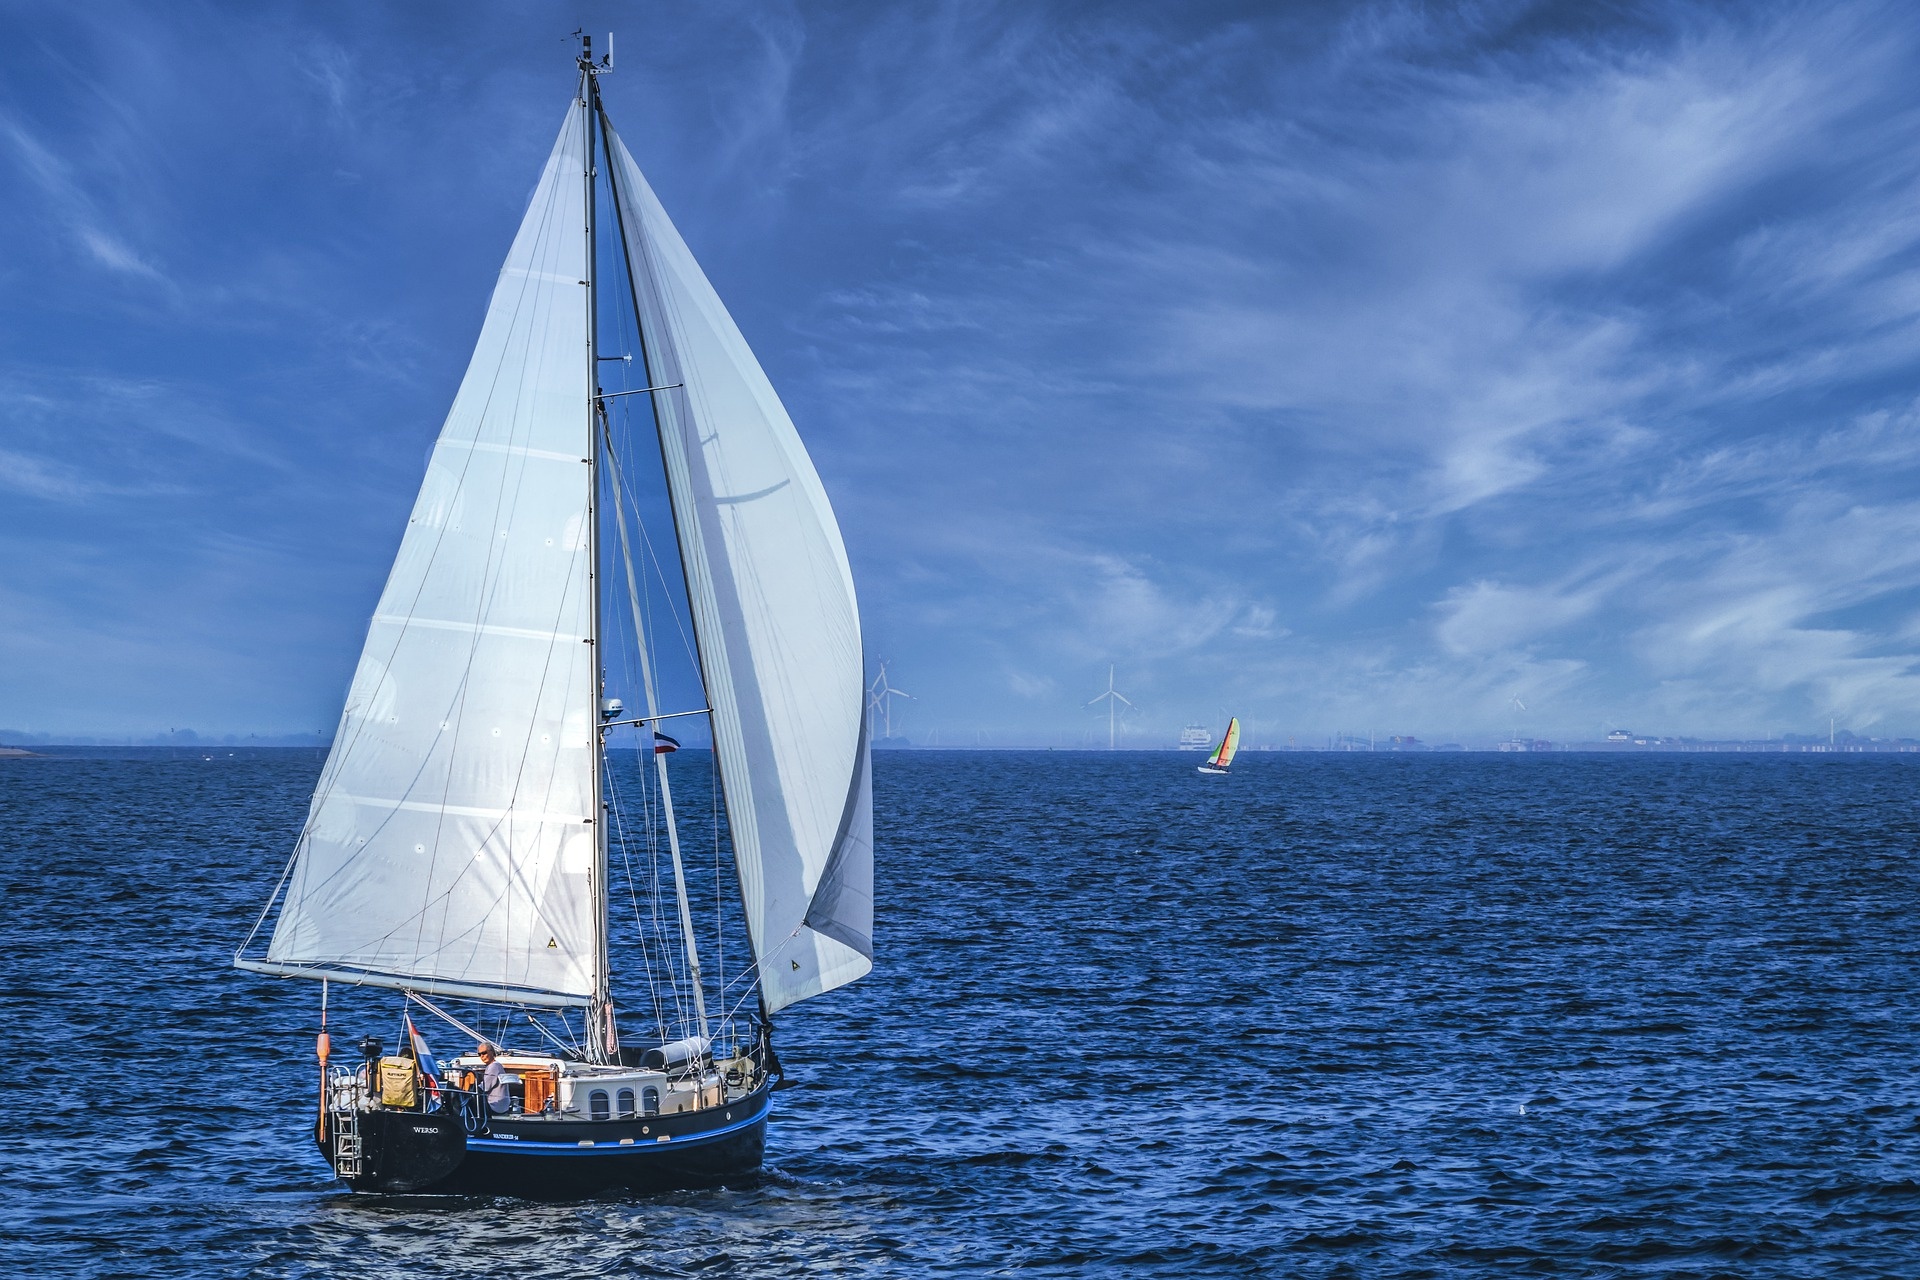 Sail Boat: One of the most common types of vessels used in recreational purposes and competitions. 1920x1280 HD Wallpaper.